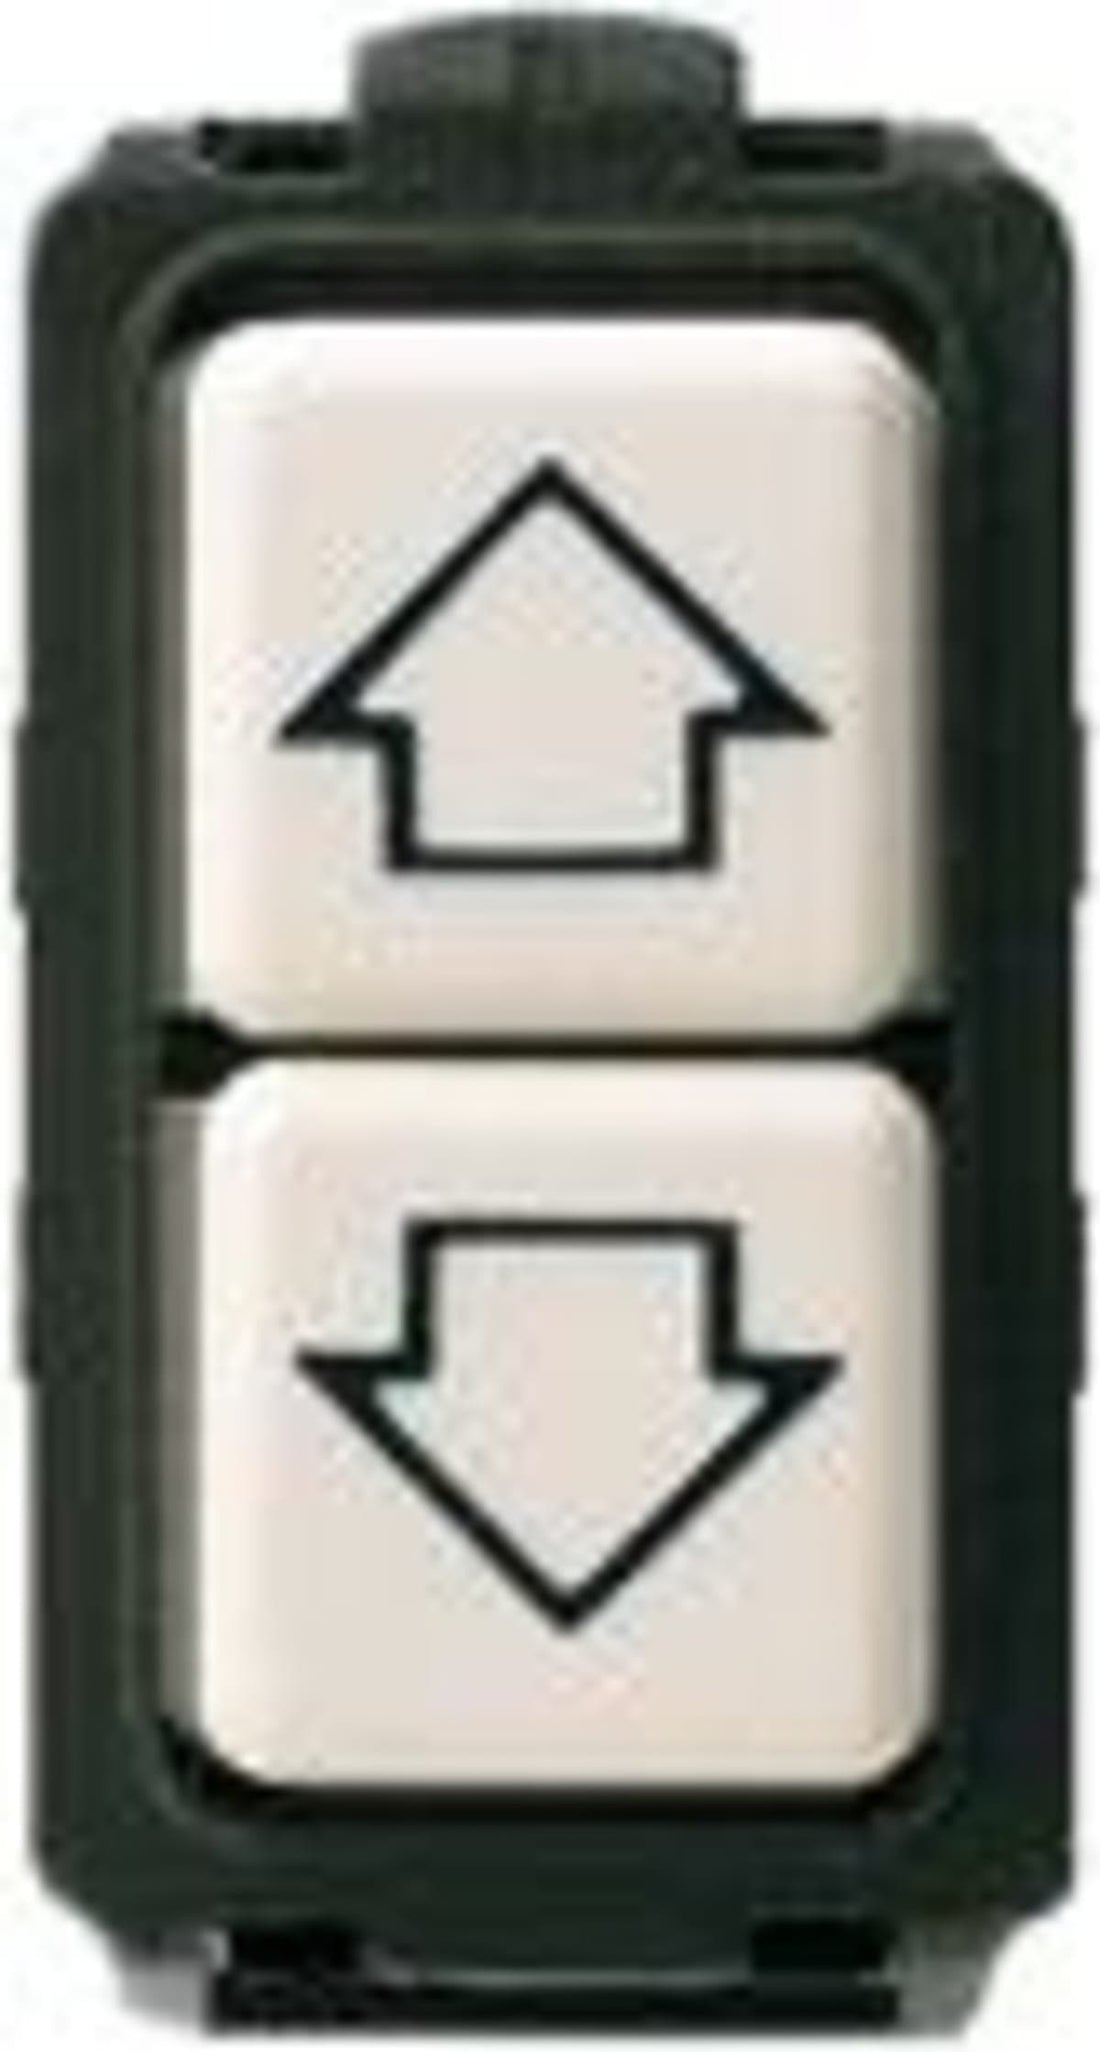 DOUBLE MAGIC 10A BUTTON WITH ARROWS - best price from Maltashopper.com BR420100719